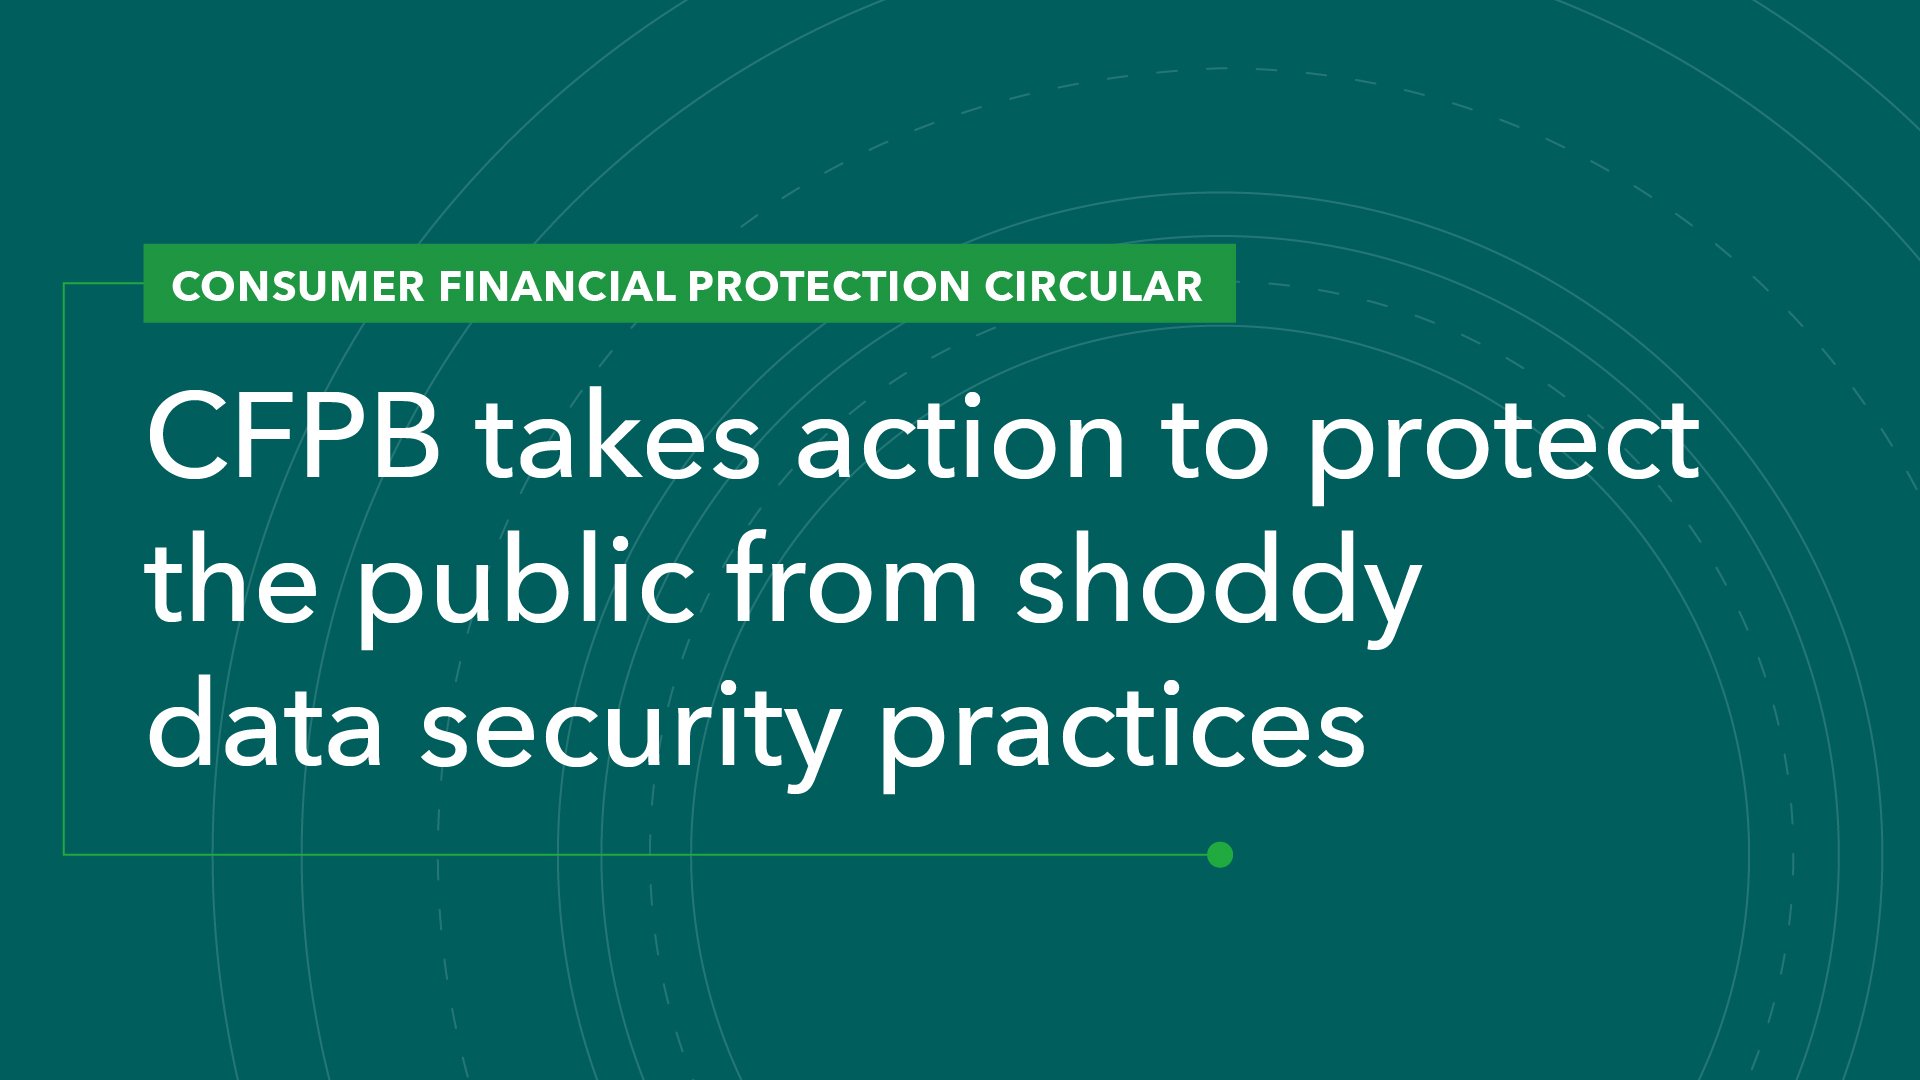 CFPB Takes Action to Protect the Public from Shoddy Data Security Practices